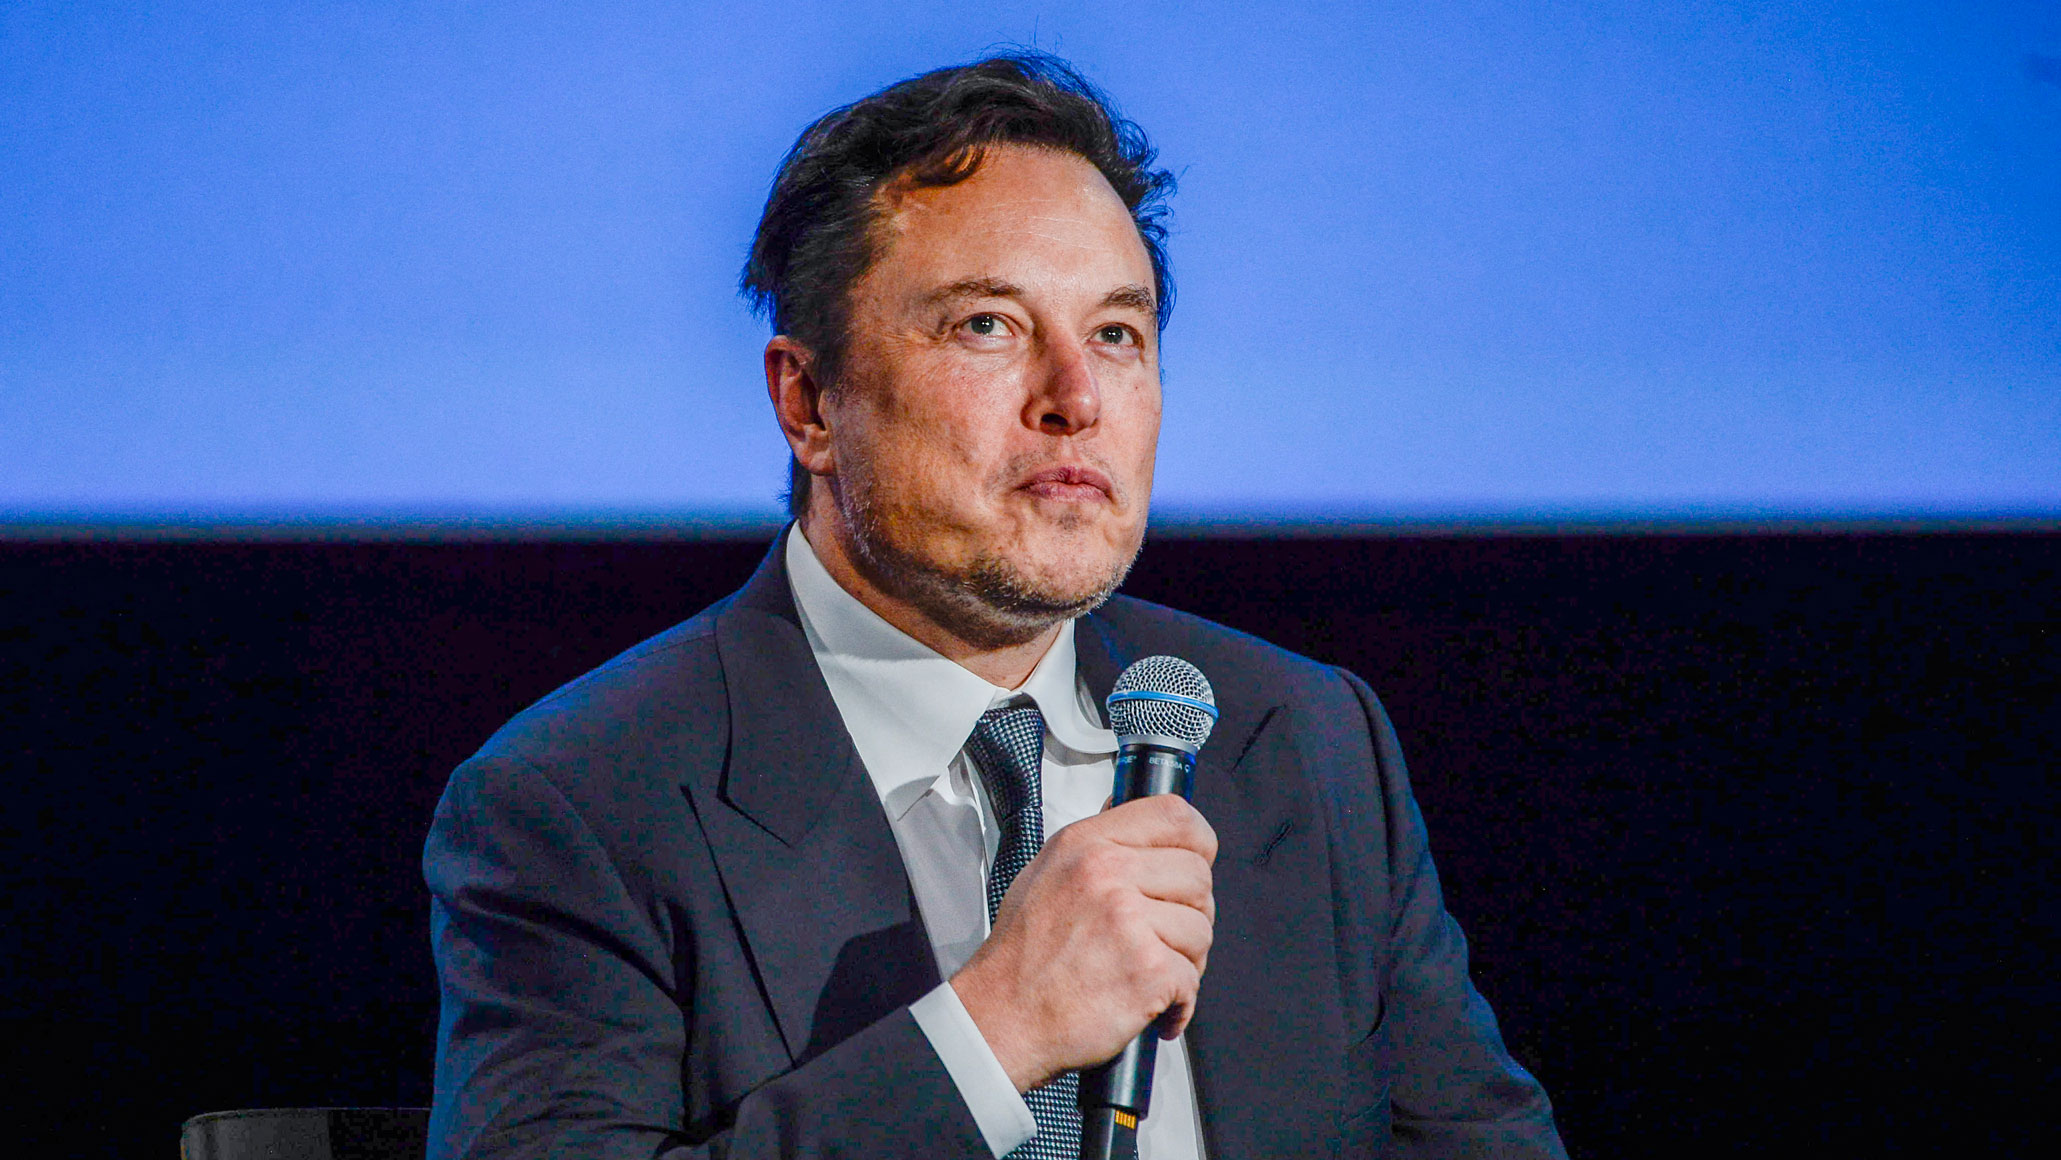 Tesla CEO Elon Musk looks up as he addresses guests at the Offshore Northern Seas 2022 (ONS) meeting in Stavanger, Norway on August 29, 2022